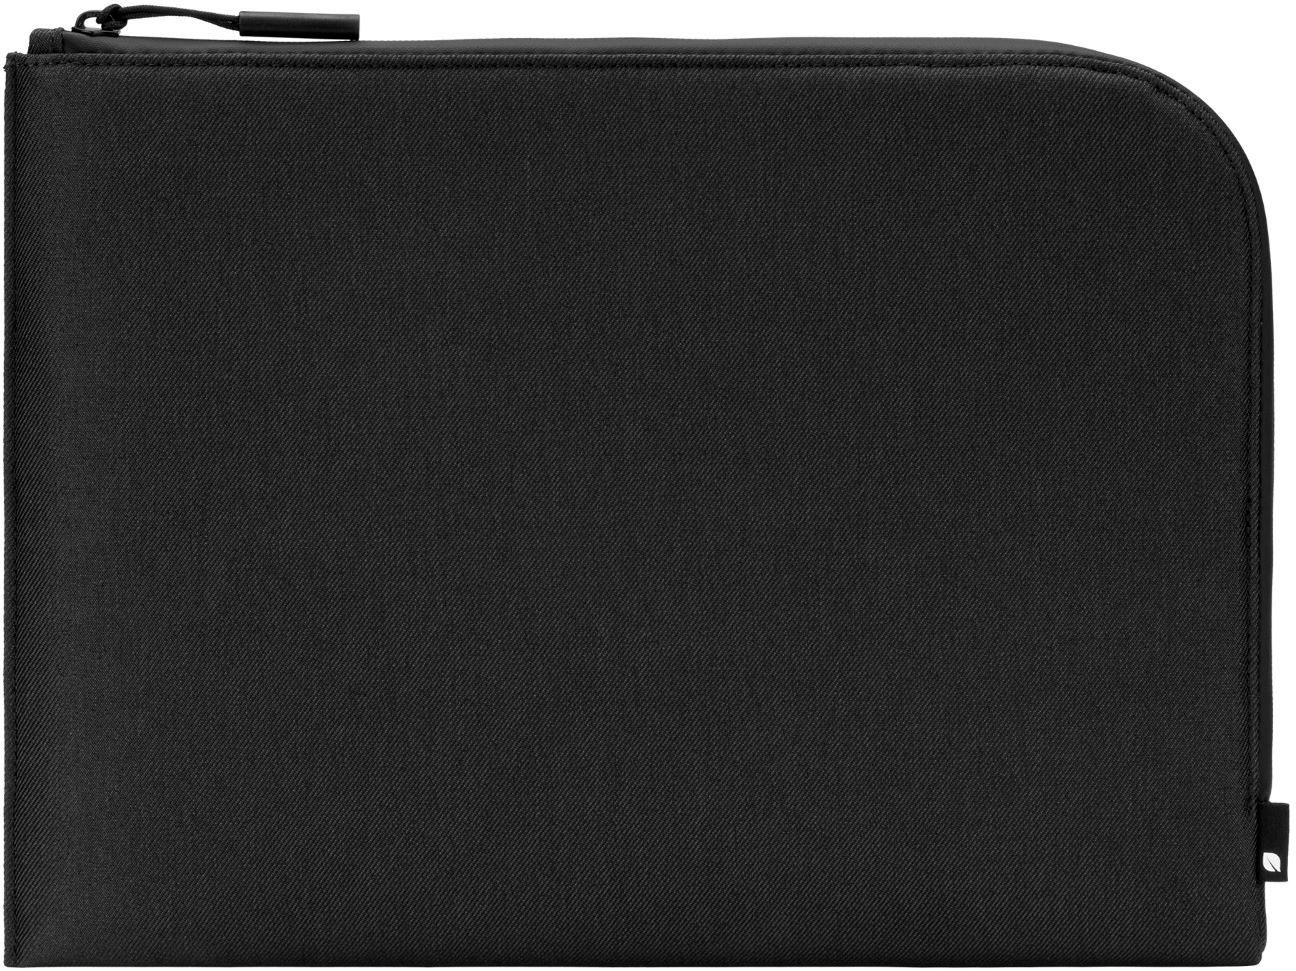 Back View: Incase - Facet Sleeve up to 16" Macbook Pro - Black